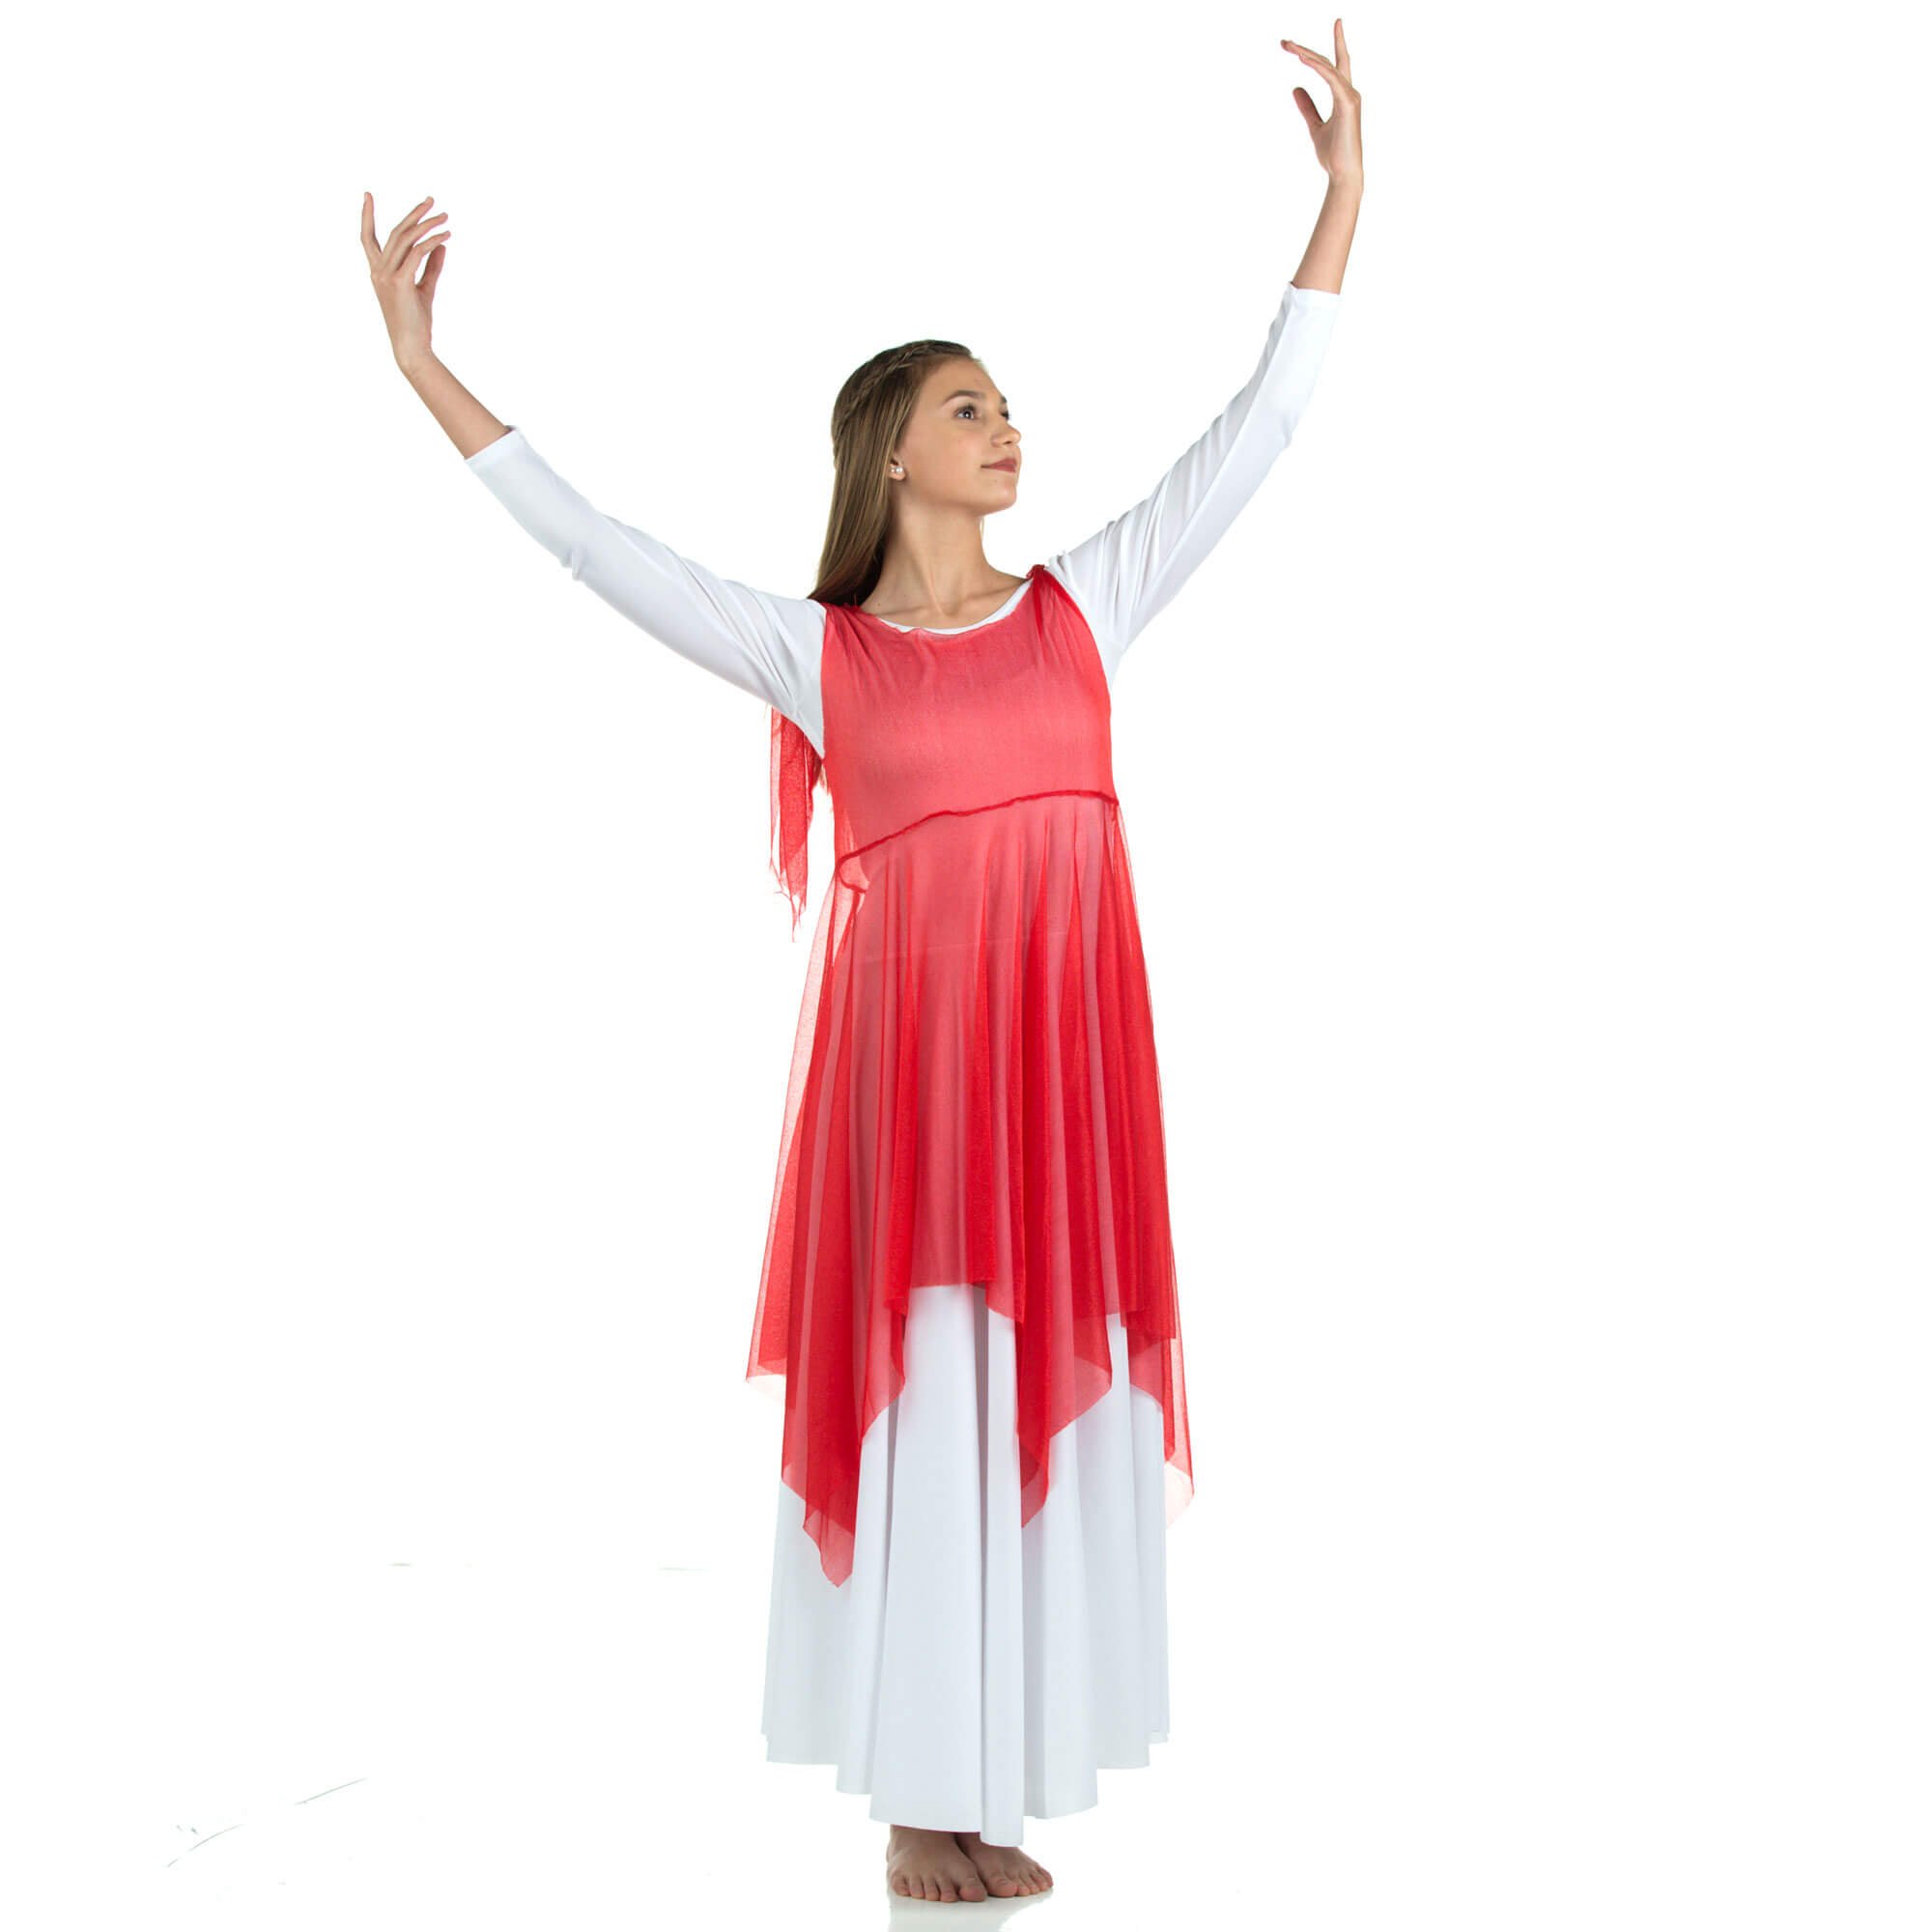 Danzcue Crepe Praise Dance Overdress (leotard not included) - Click Image to Close